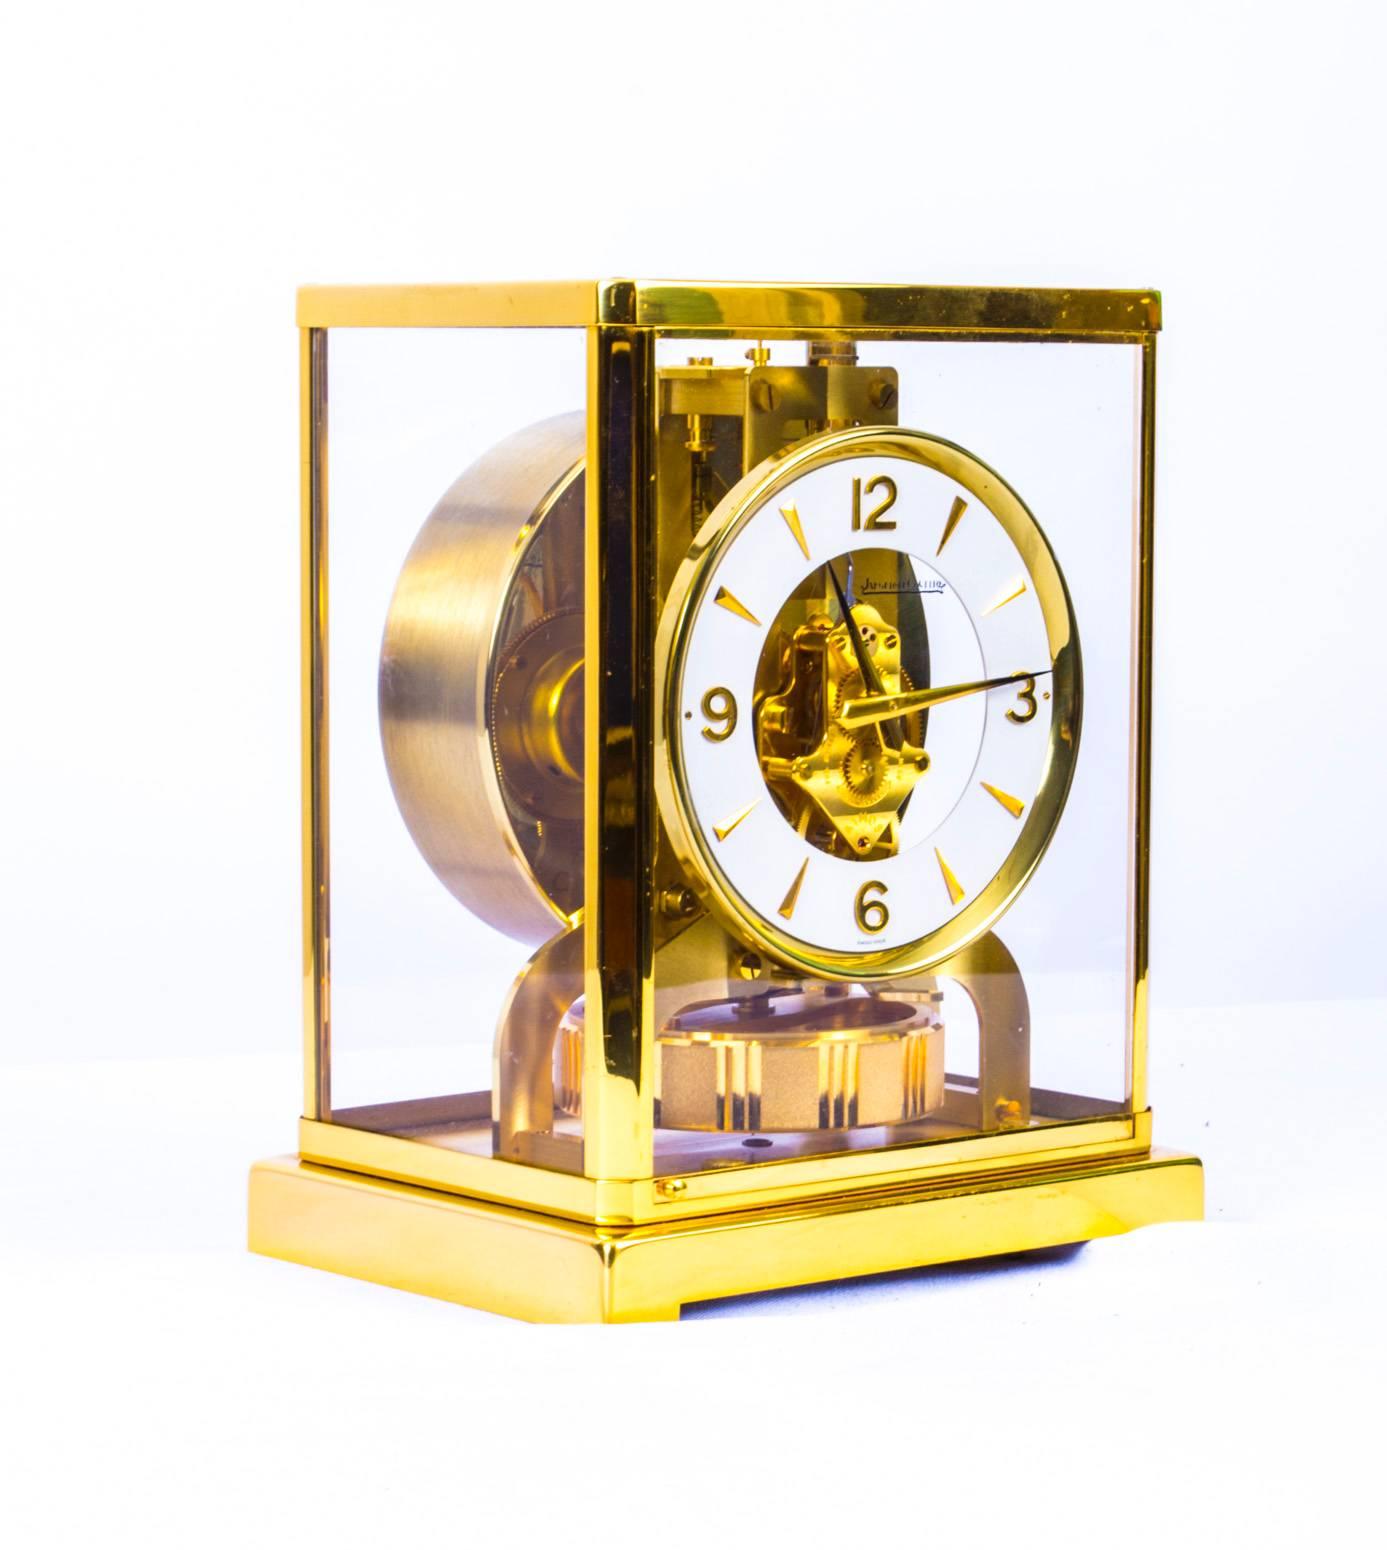 This is a beautiful and very decorative Vintage Jaeger Le Coultre Atmos Classic VIII brass-mounted four glass mantel skeleton clock bearing their engraved signature on the movement and circa 1960 in date.

The clock has a beautiful polished gilt